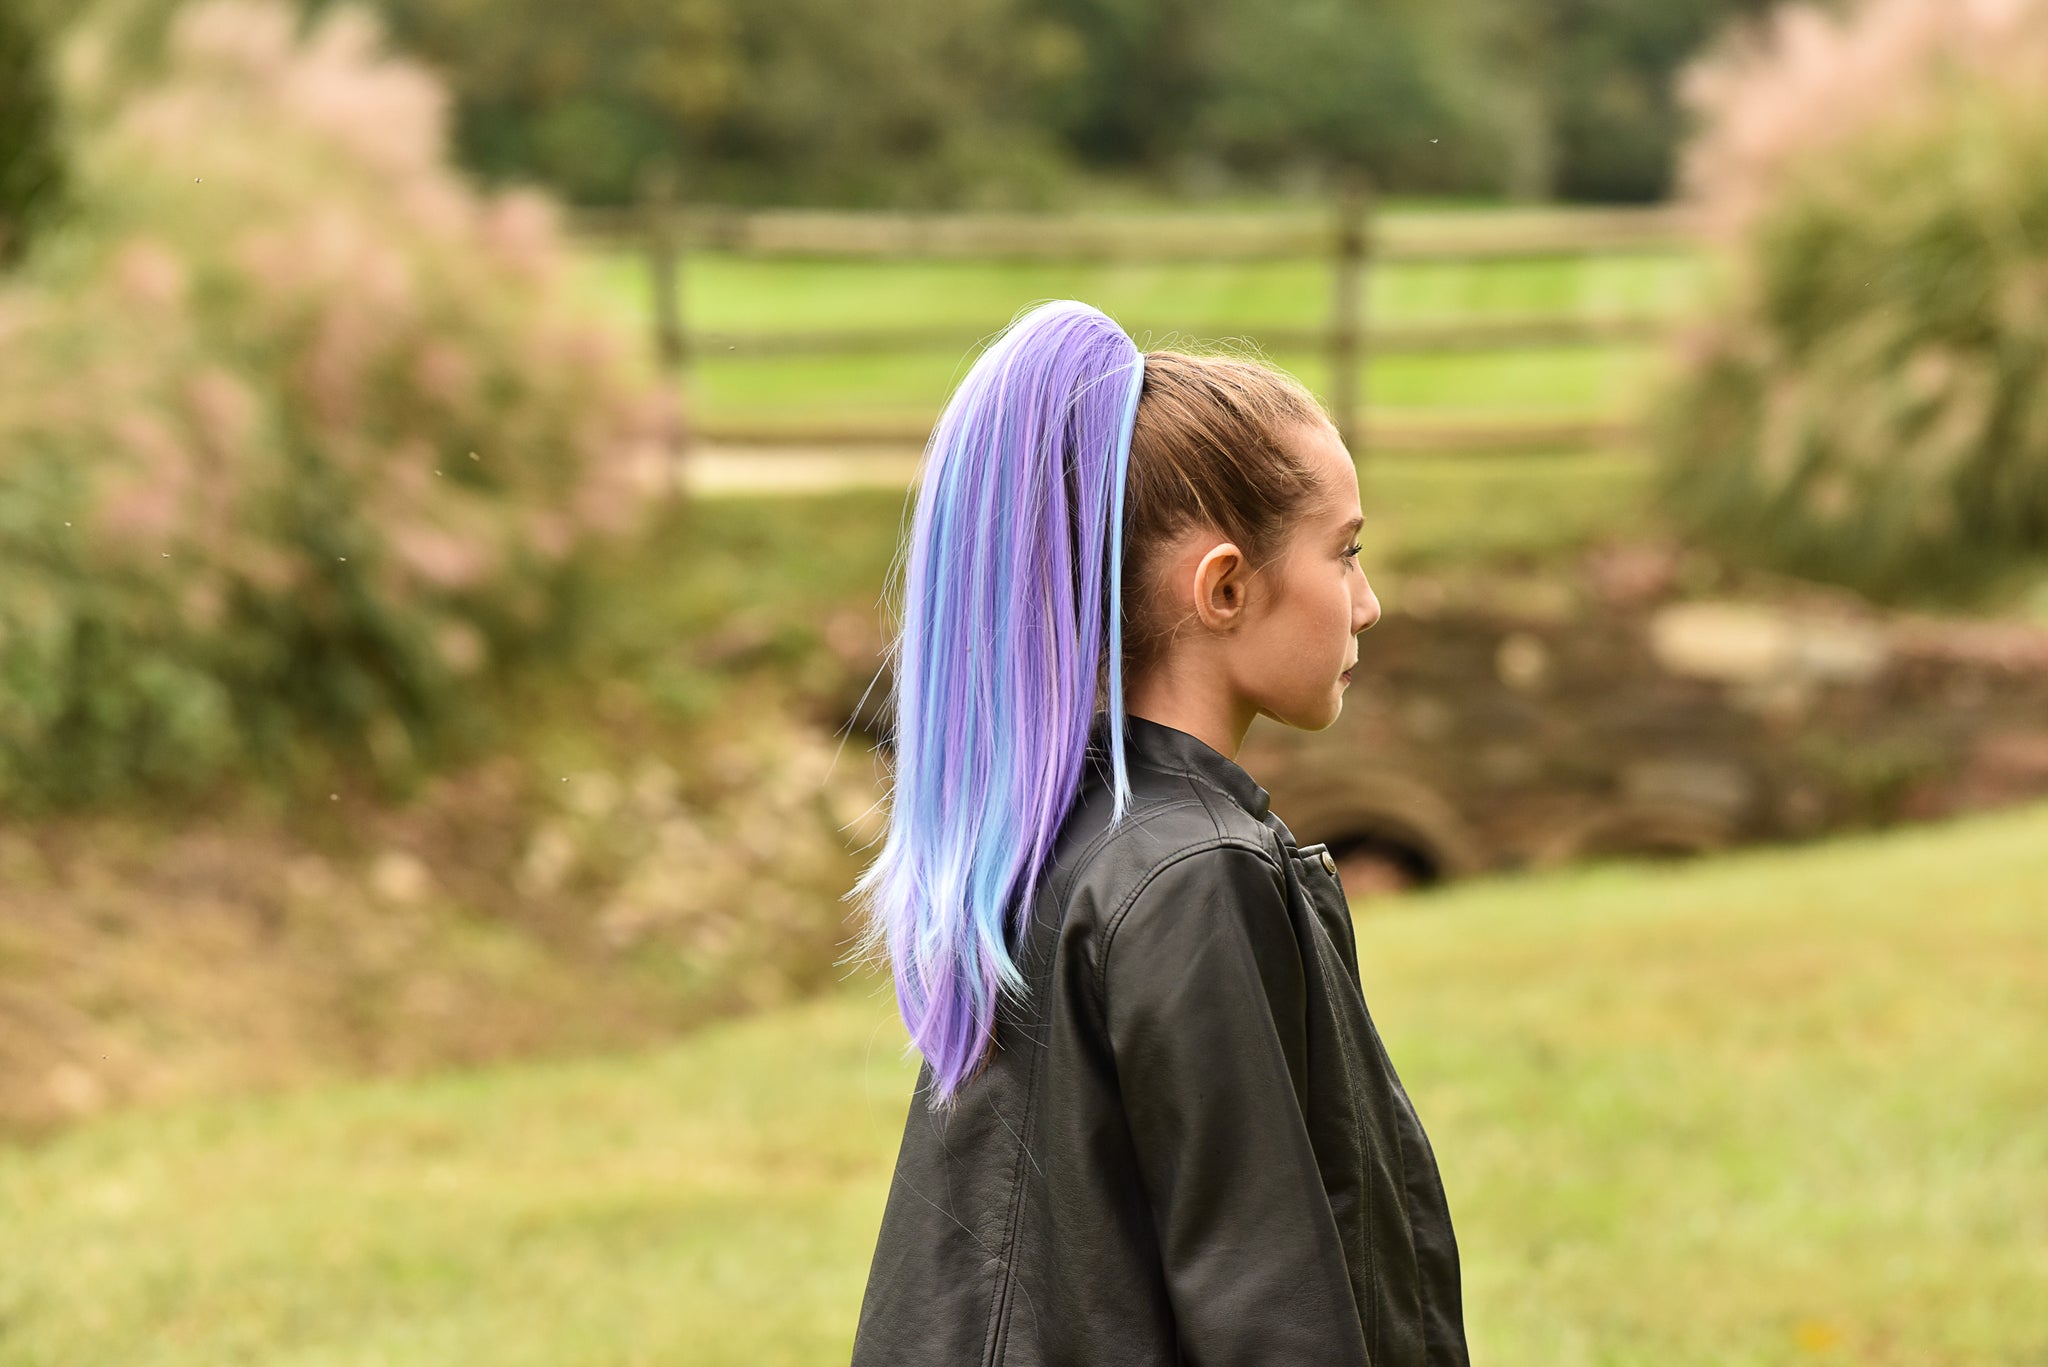 8. Iridescent Blue Purple Hair Extensions - wide 4